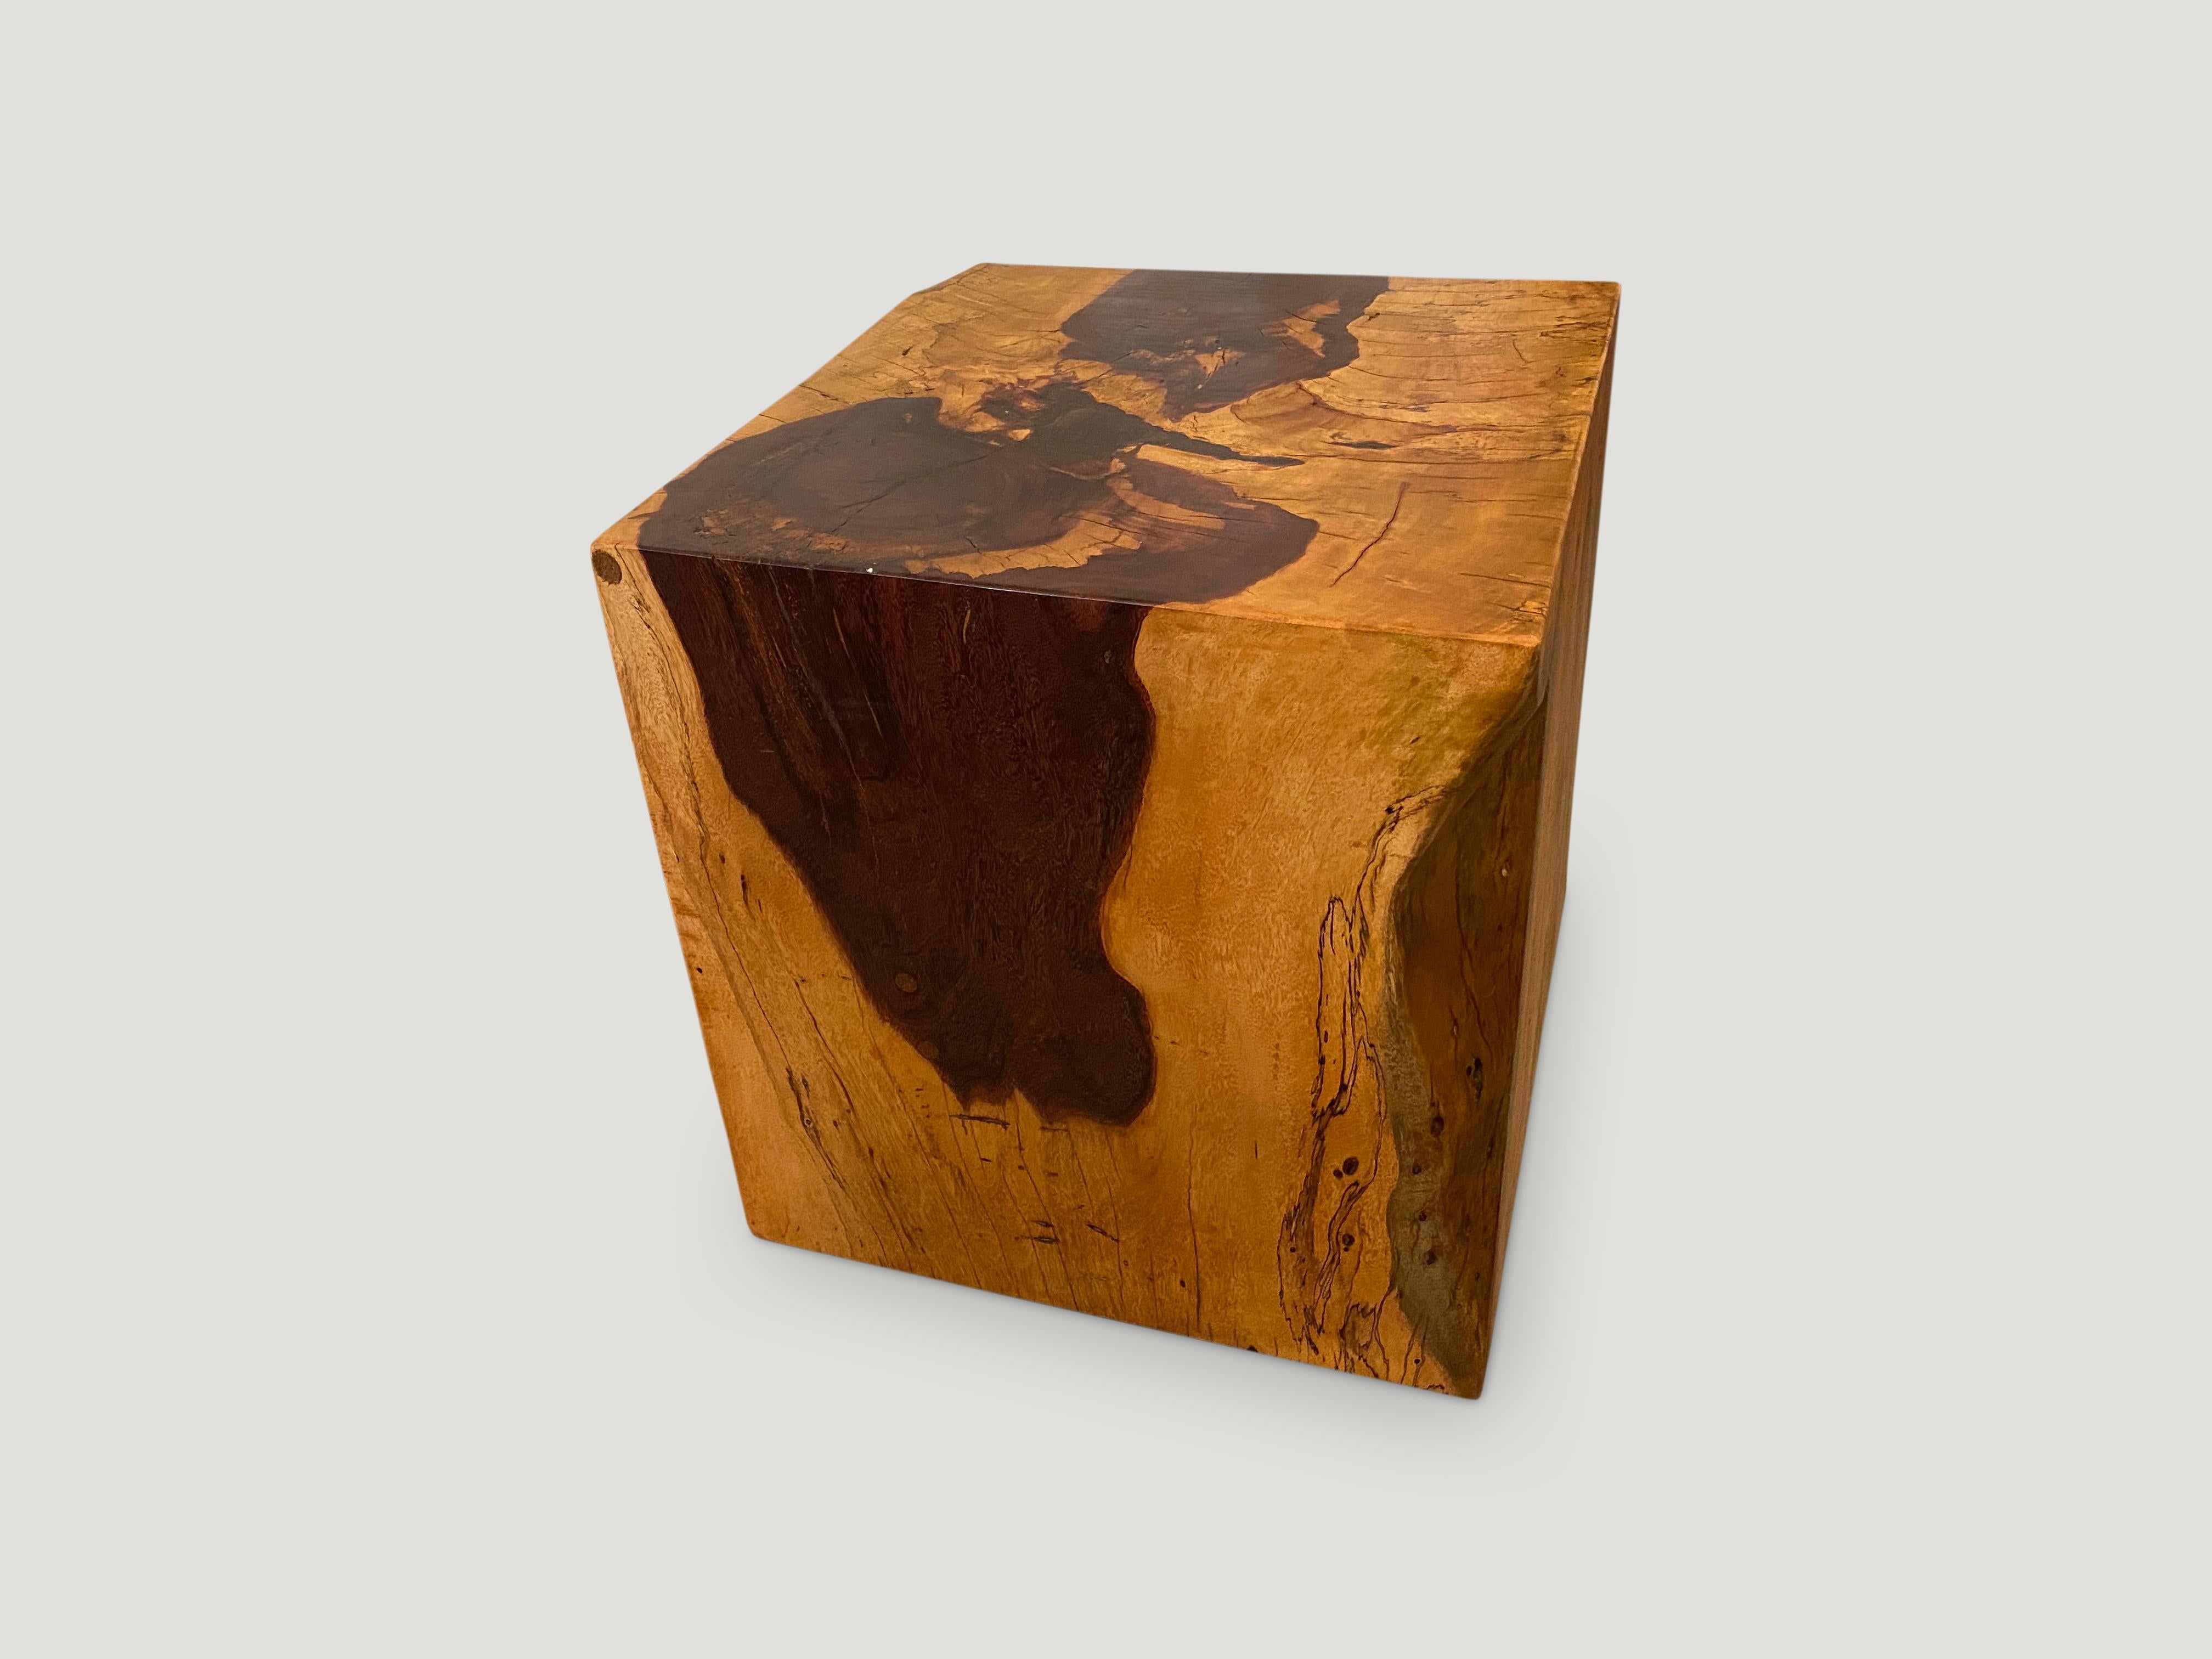 Reclaimed tamarind wood cube side table. Natural contrasting colors and patterns throughout. We have added an oil finish. Organic is the new modern.

Andrianna Shamaris. The Leader In Modern Organic Design.